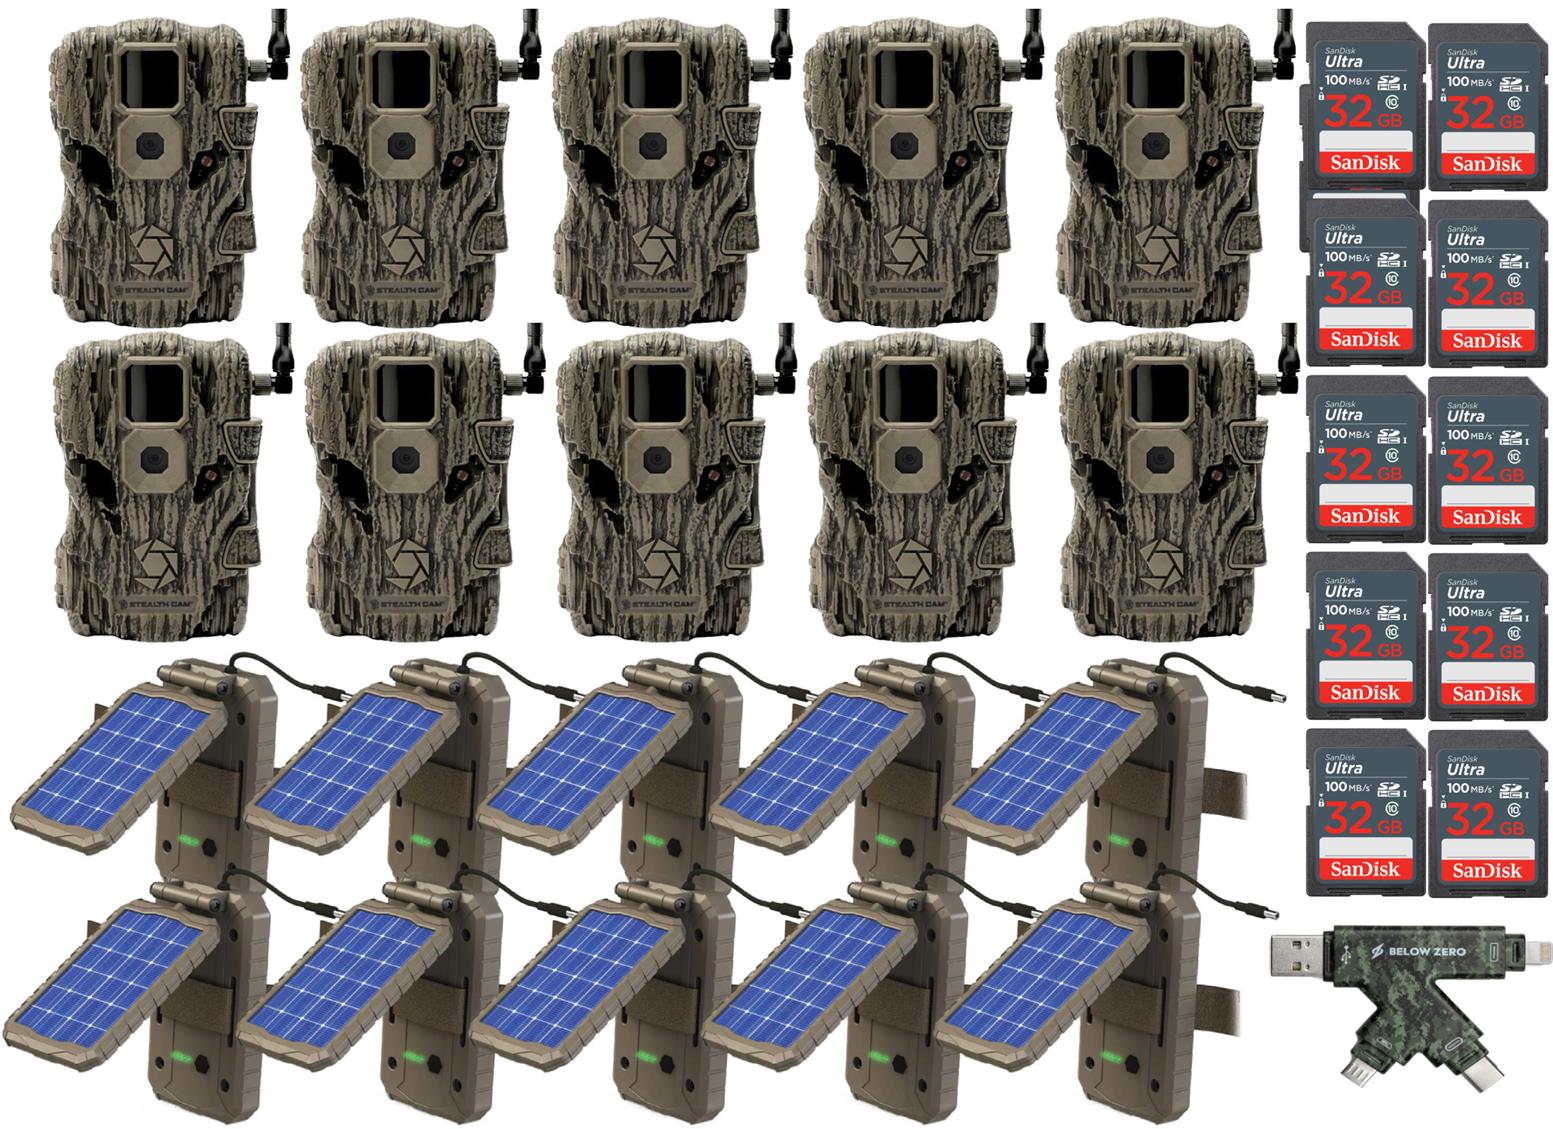 Stealth Cam Fusion X 26 MP  (Verizon) with Solar Power Panel, Card Reader Bundle 10-Pack - image 1 of 5